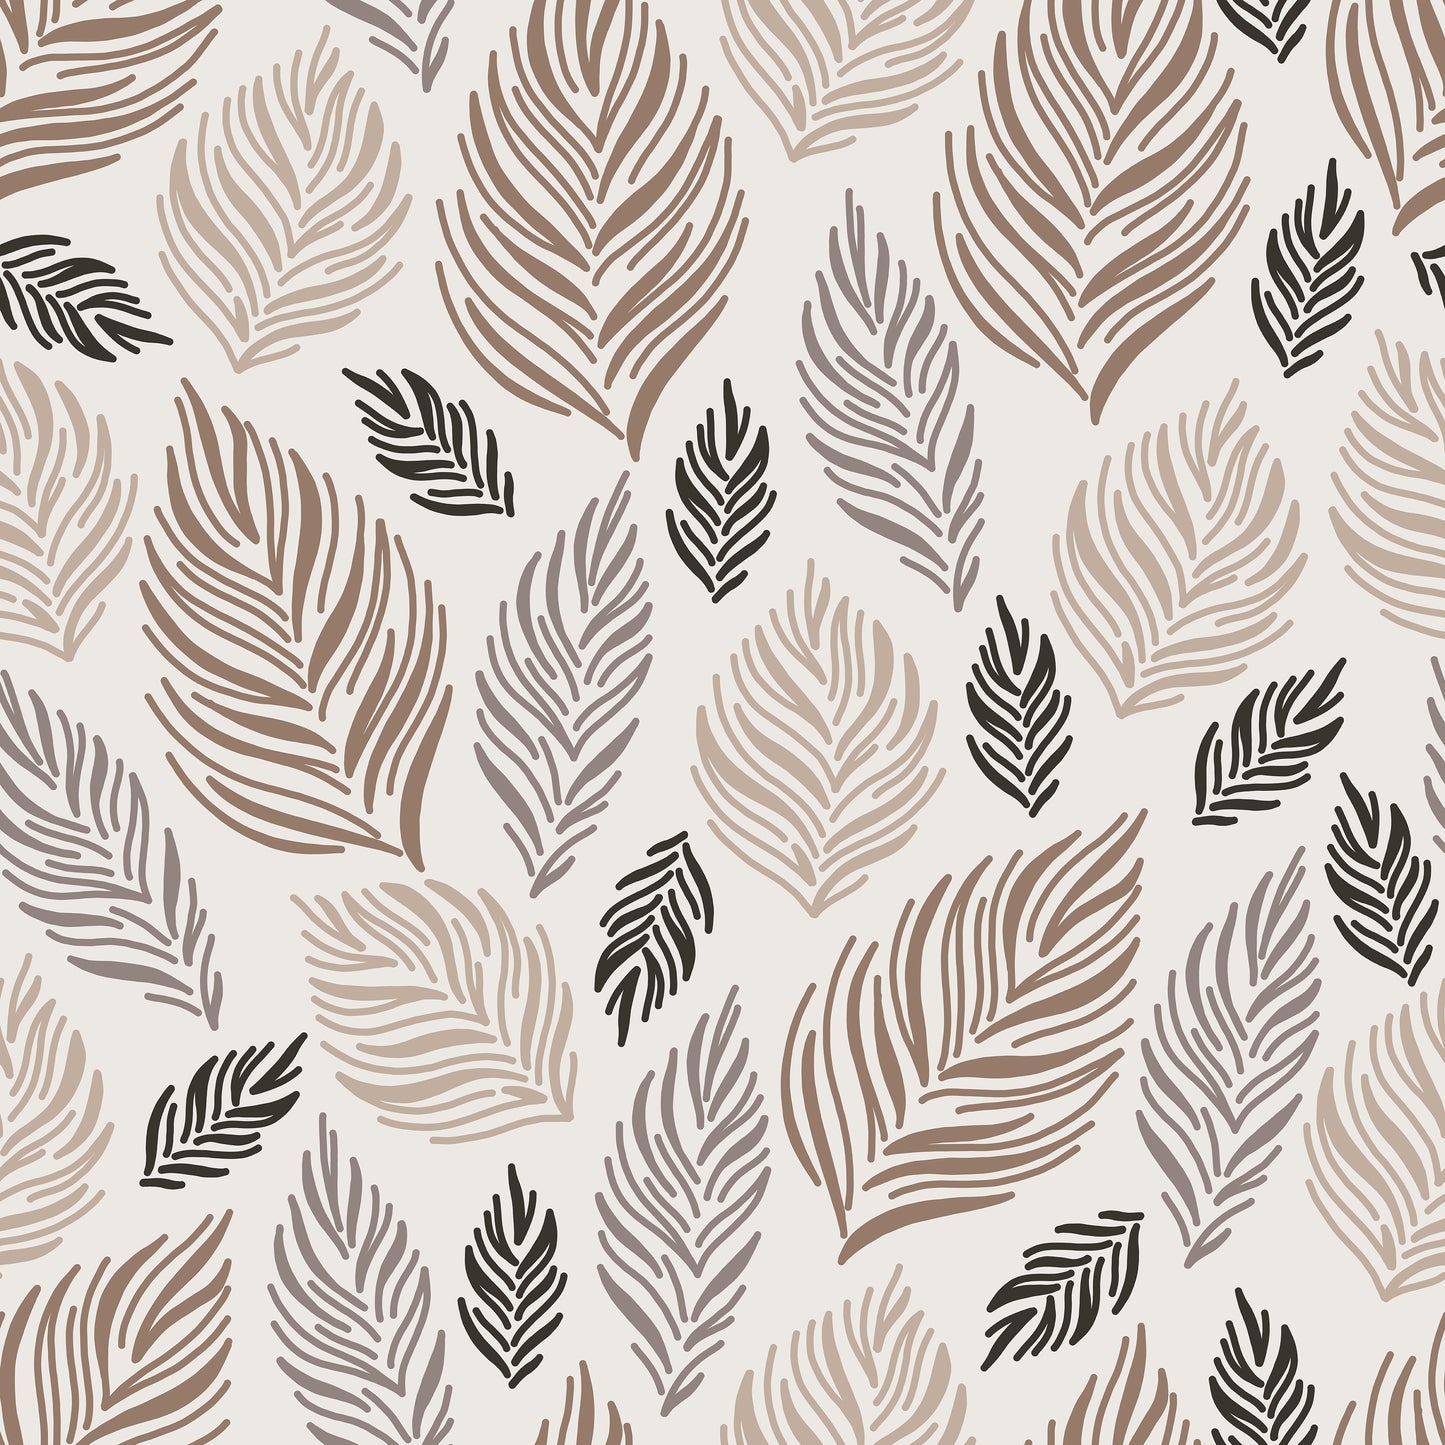 Natural Tones Brown Feathers Vinyl Furniture Sticker